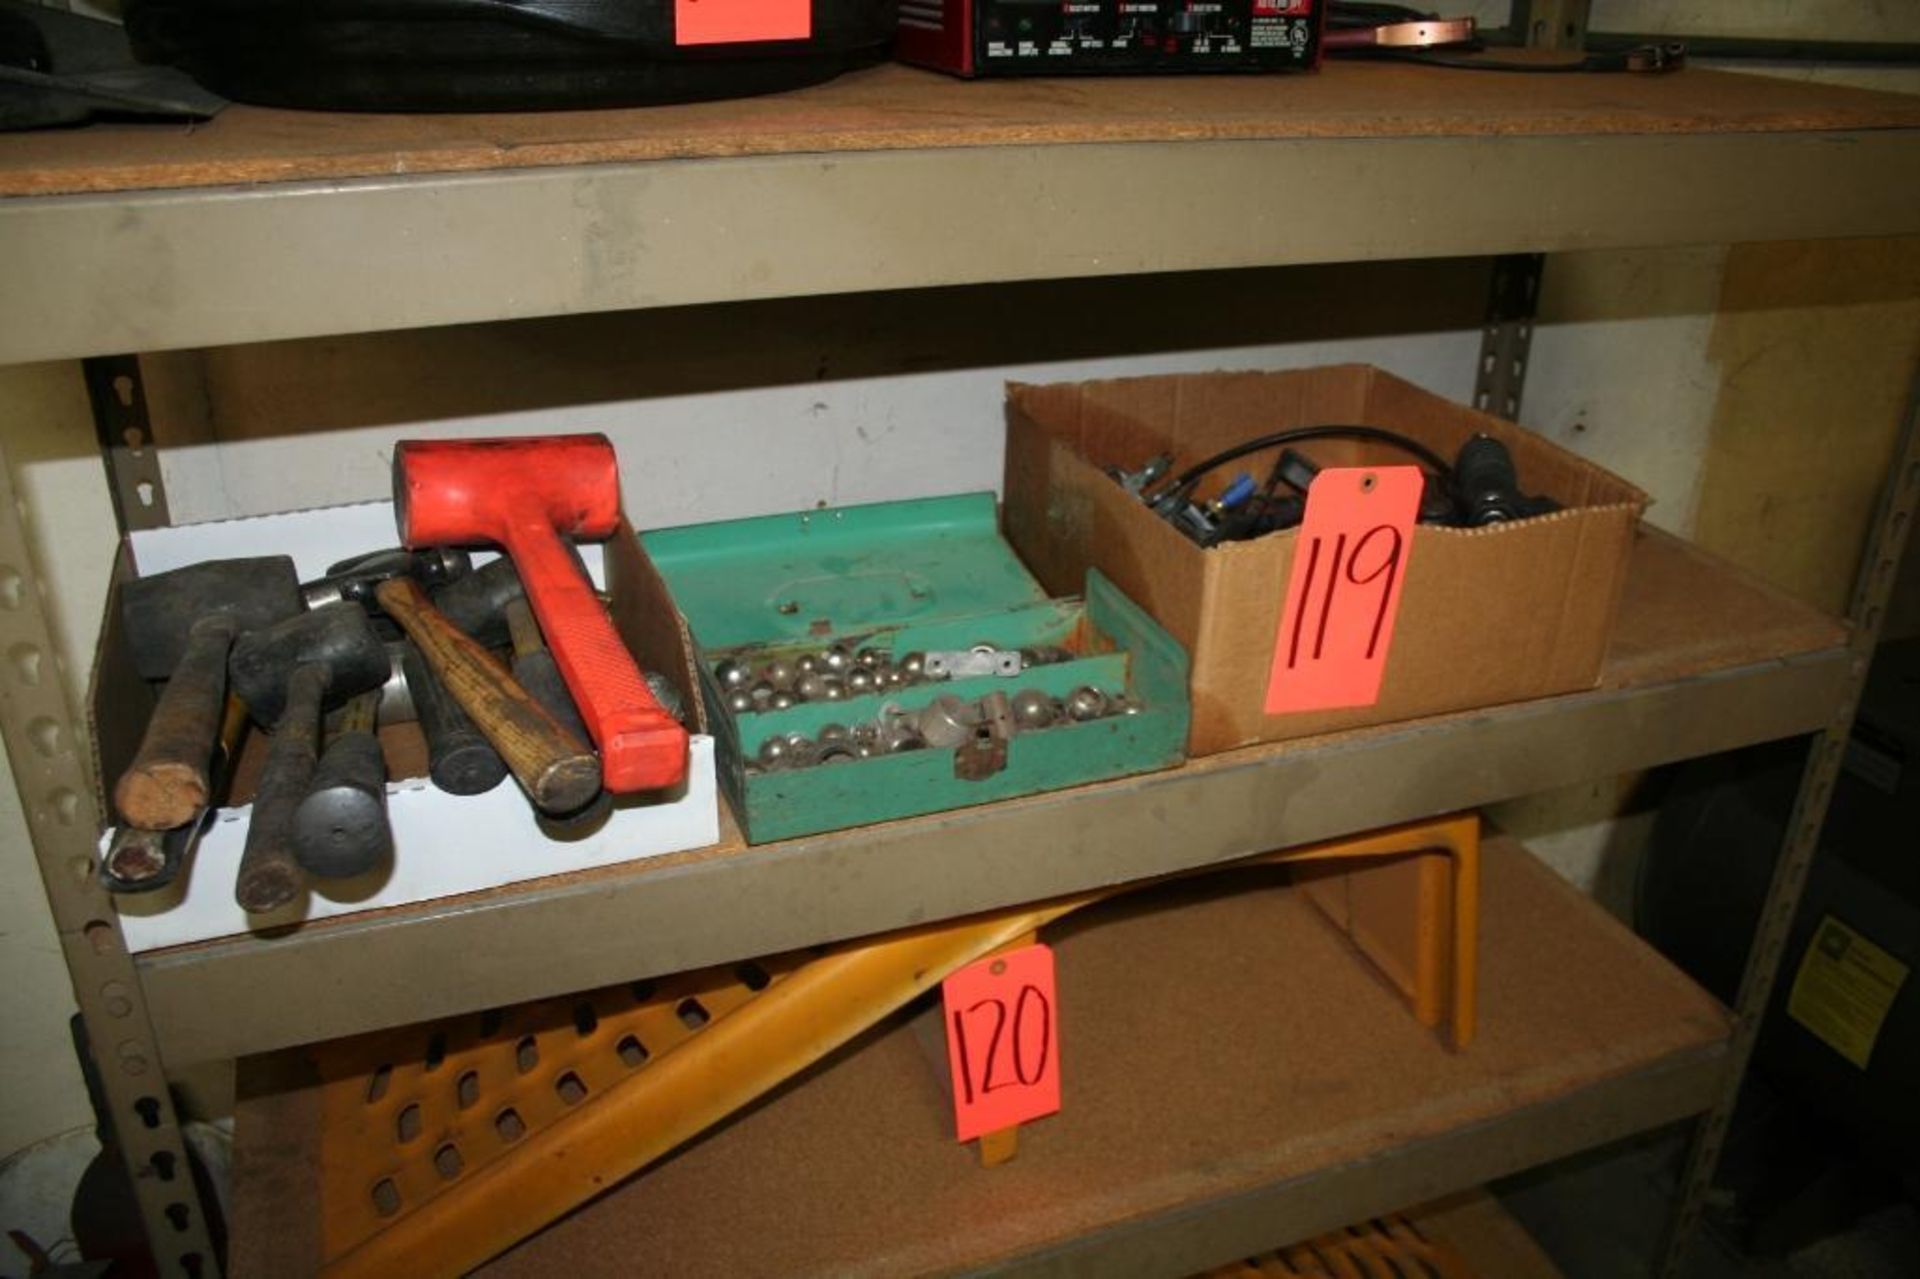 Box of hammers and Mallets, Box of Steel Balls, Box of Motorcycle parts